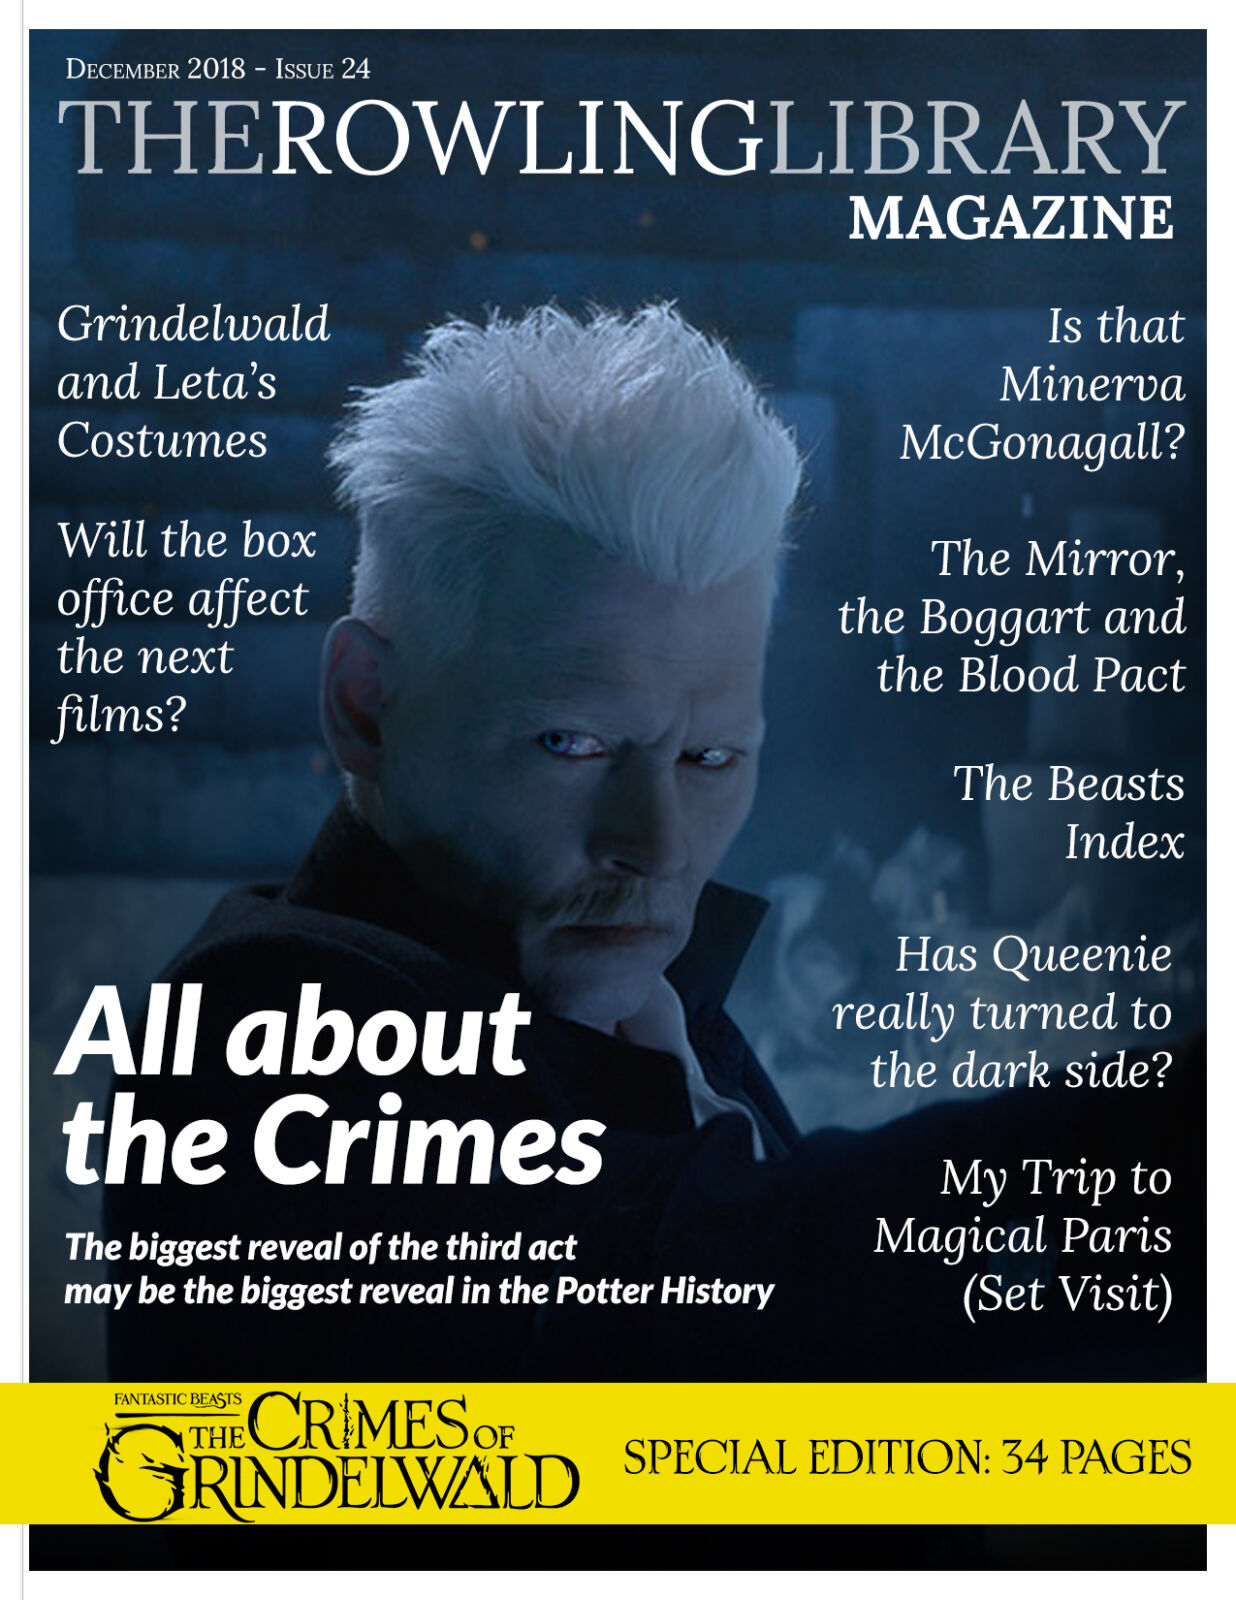 The Rowling Library Magazine #24 (December 2018): All about the Crimes